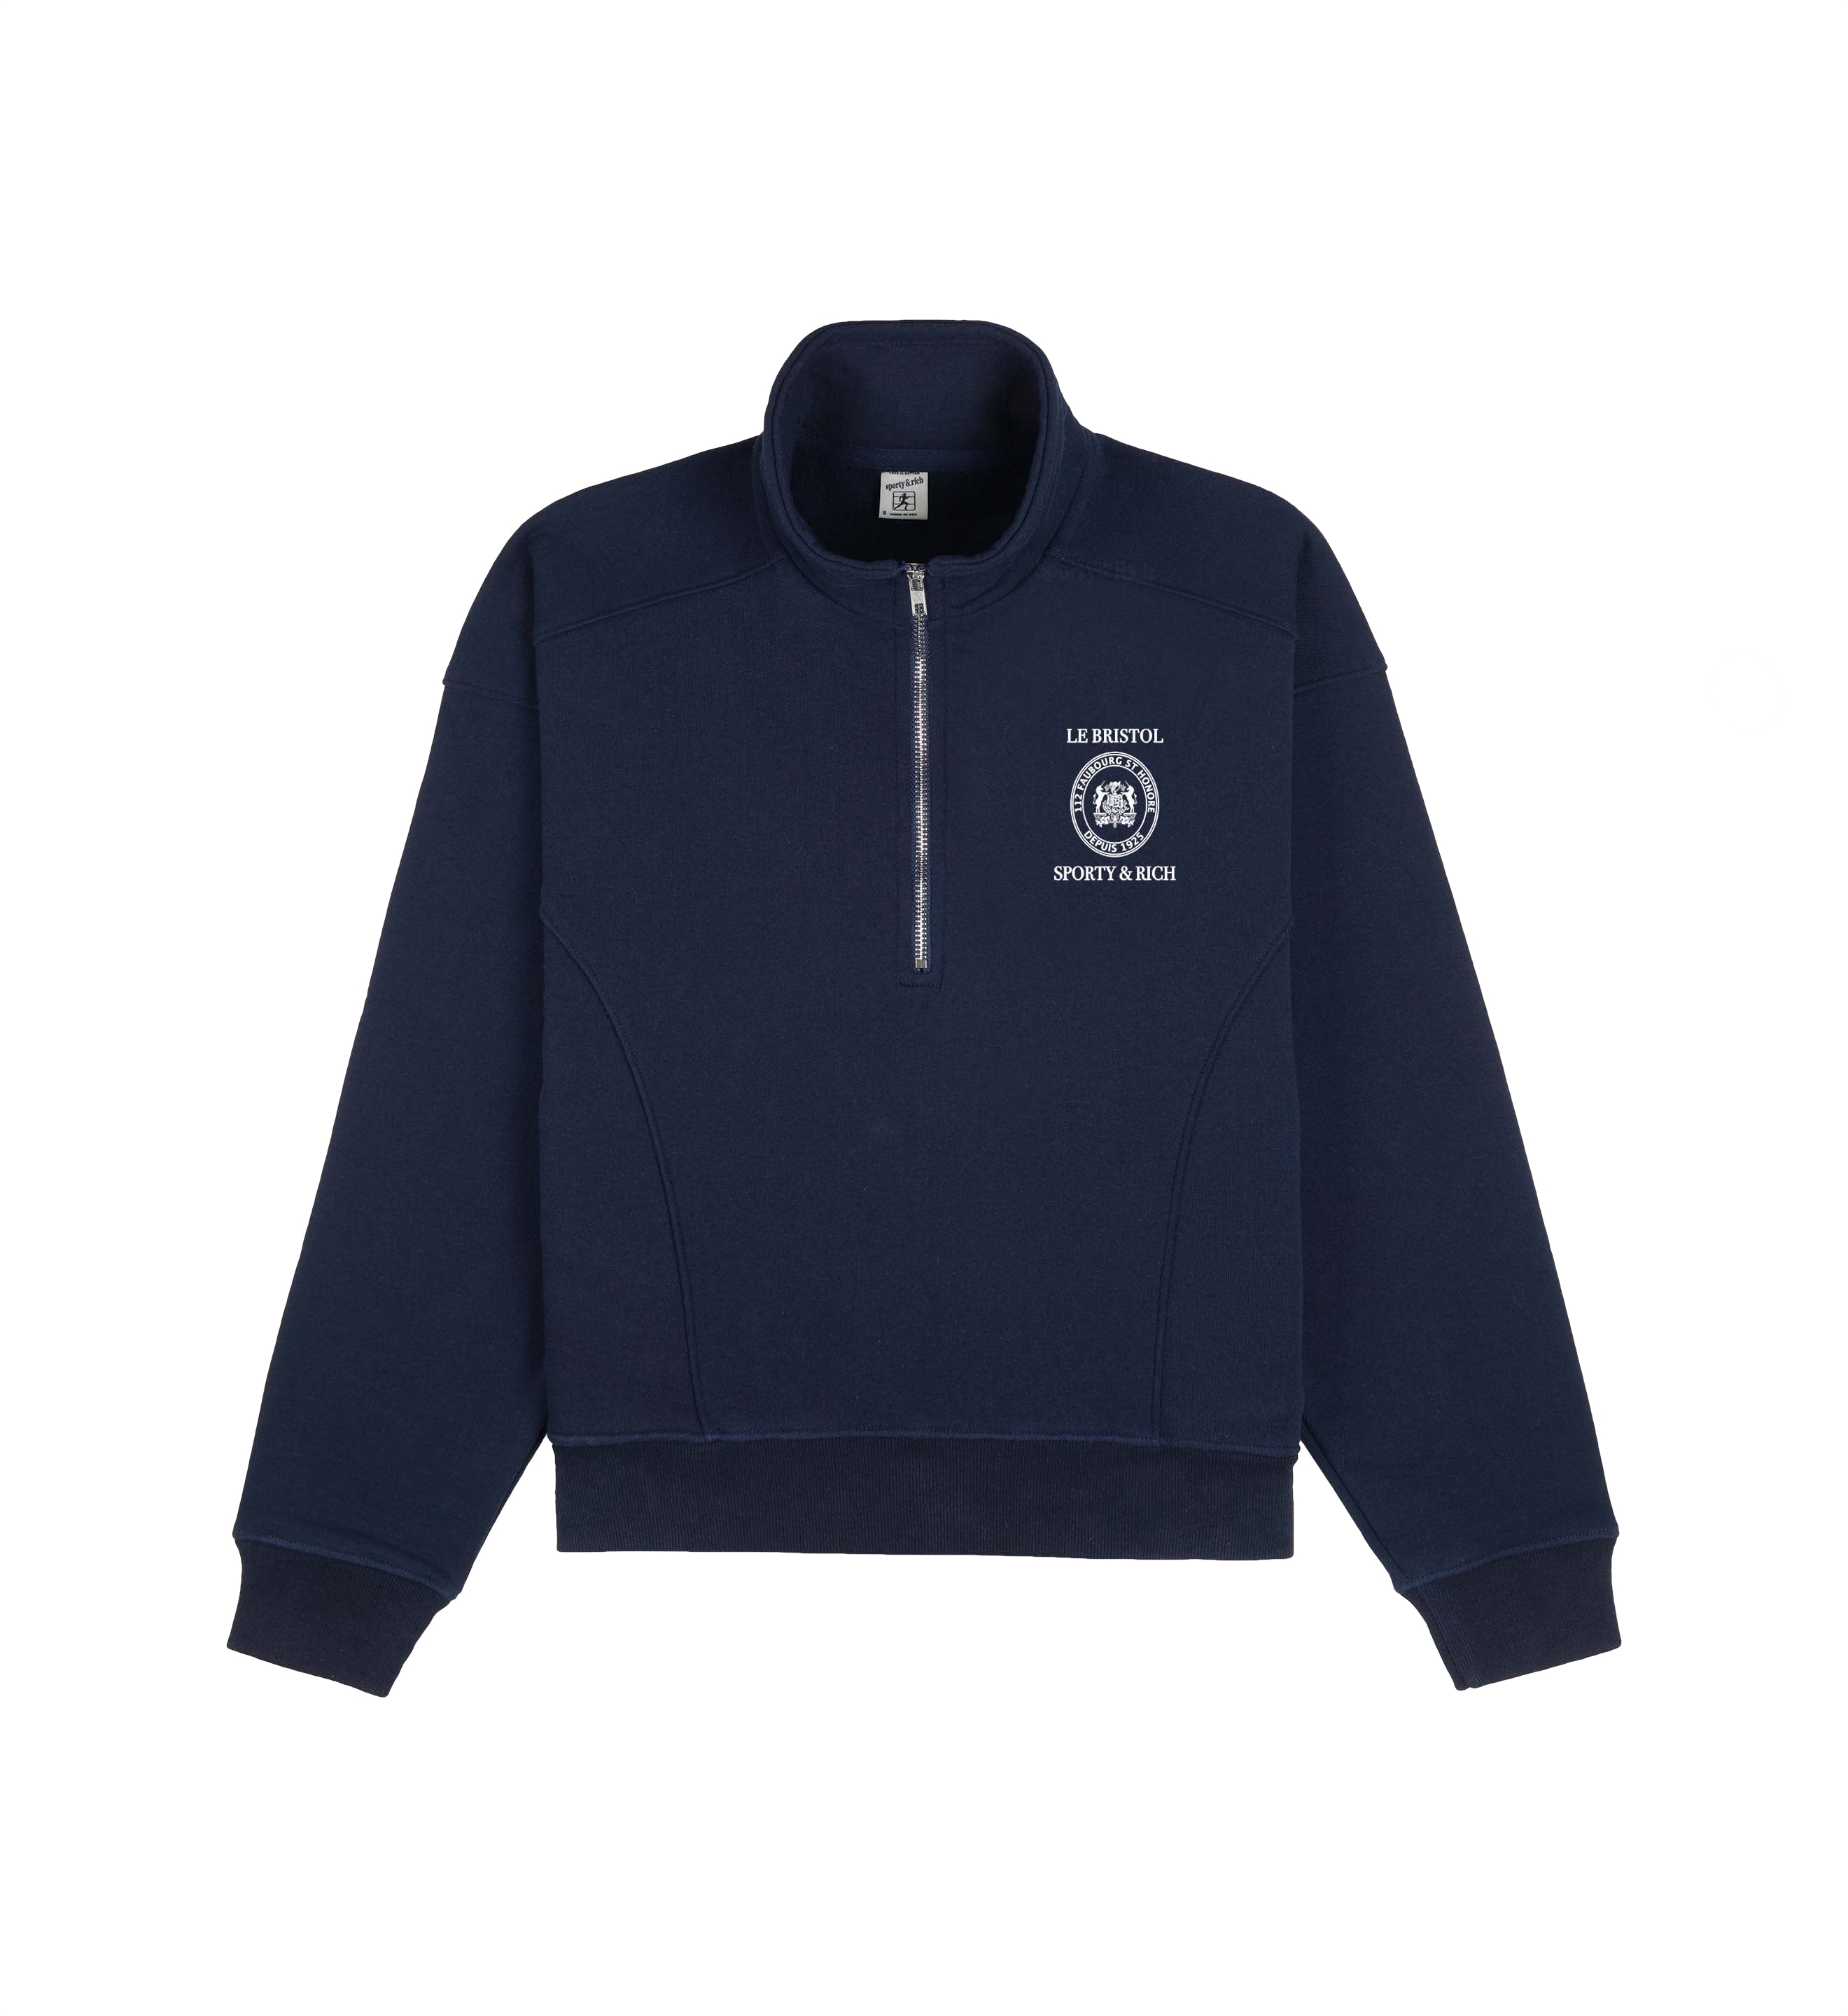 Oetker Collection Boutique Sporty & Rich x Le Bristol Marine Zipped Polo